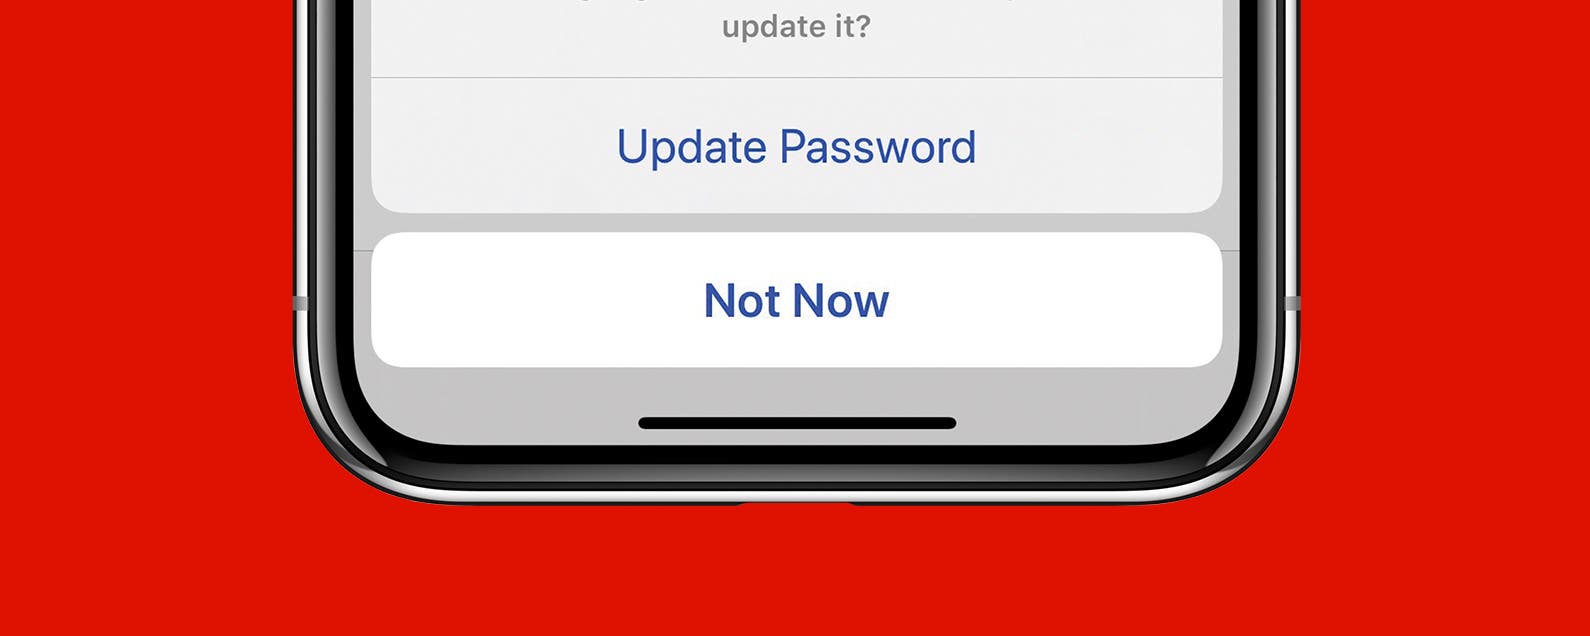 How to Change Email Password on iPhone or iPad (2022)